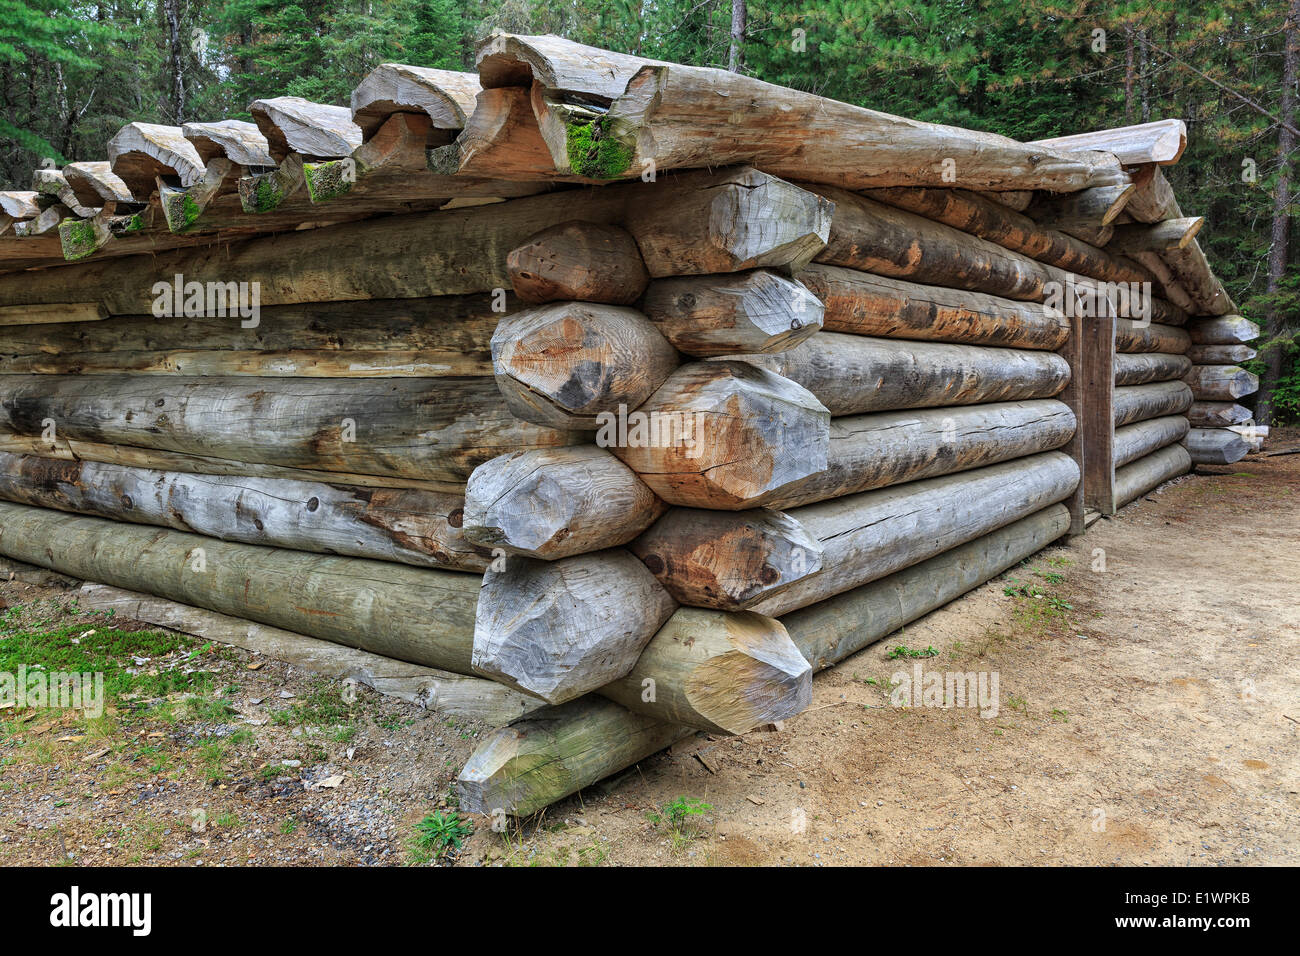 Log Cabin for logging camp workers historically known as a 'camboose shanty' Algonquin Logging Museum Algonquin Provincial Park Stock Photo